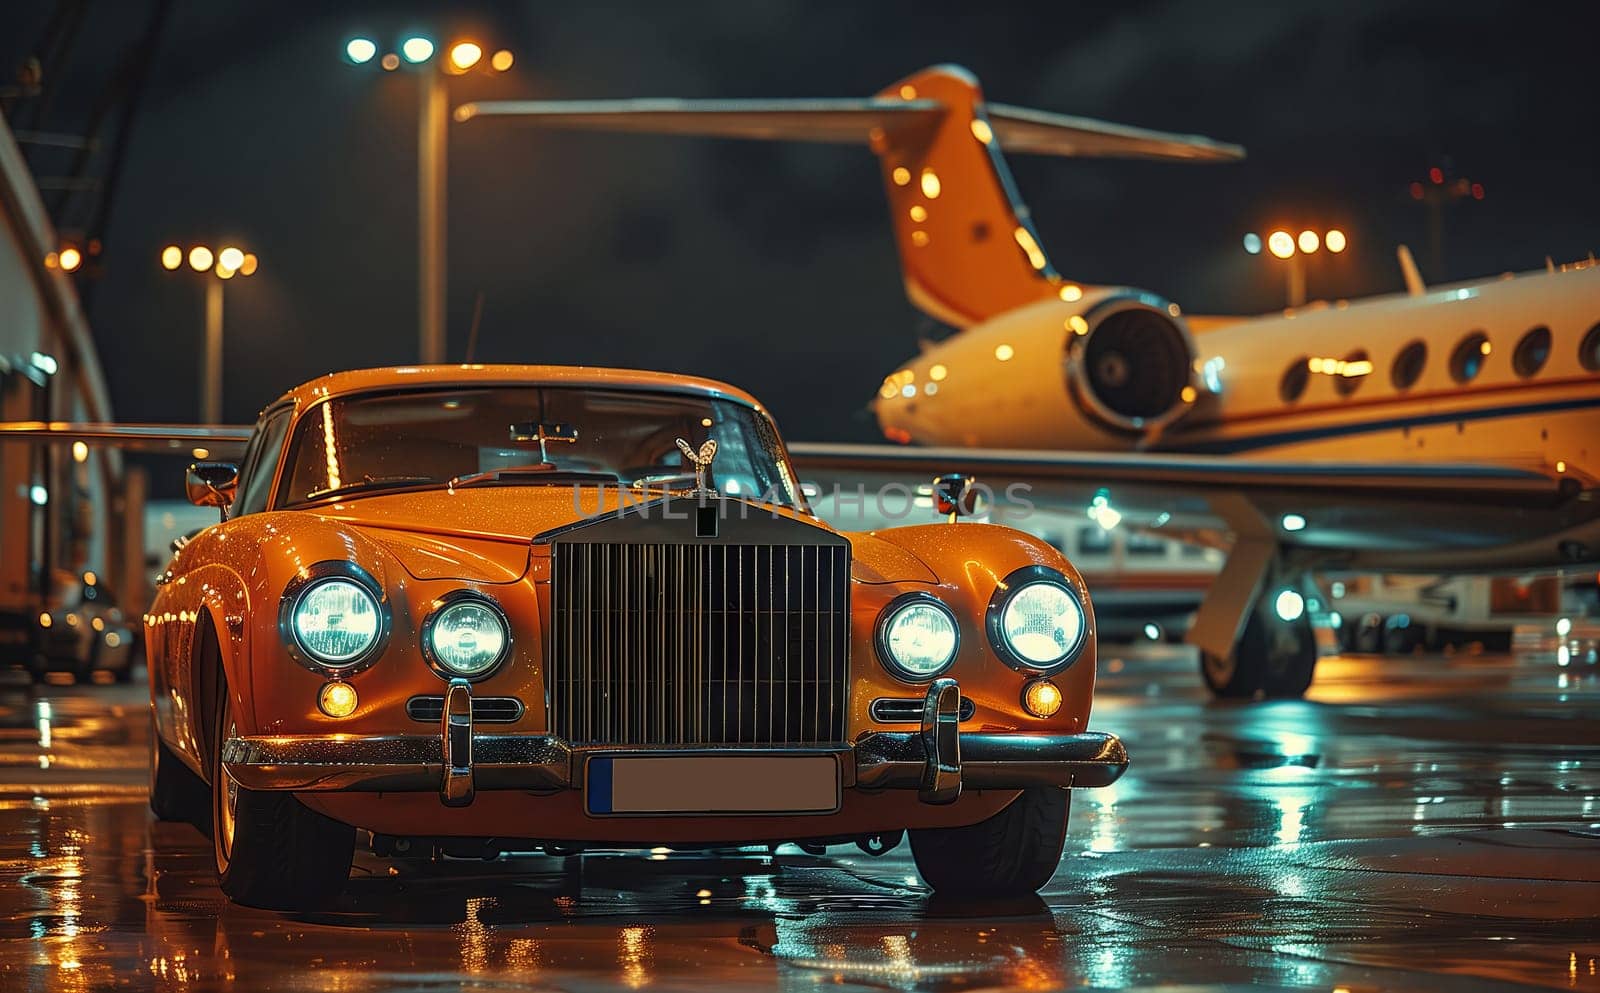 Rolls Royce parked by private jet, automotive luxury meets aviation elegance by richwolf